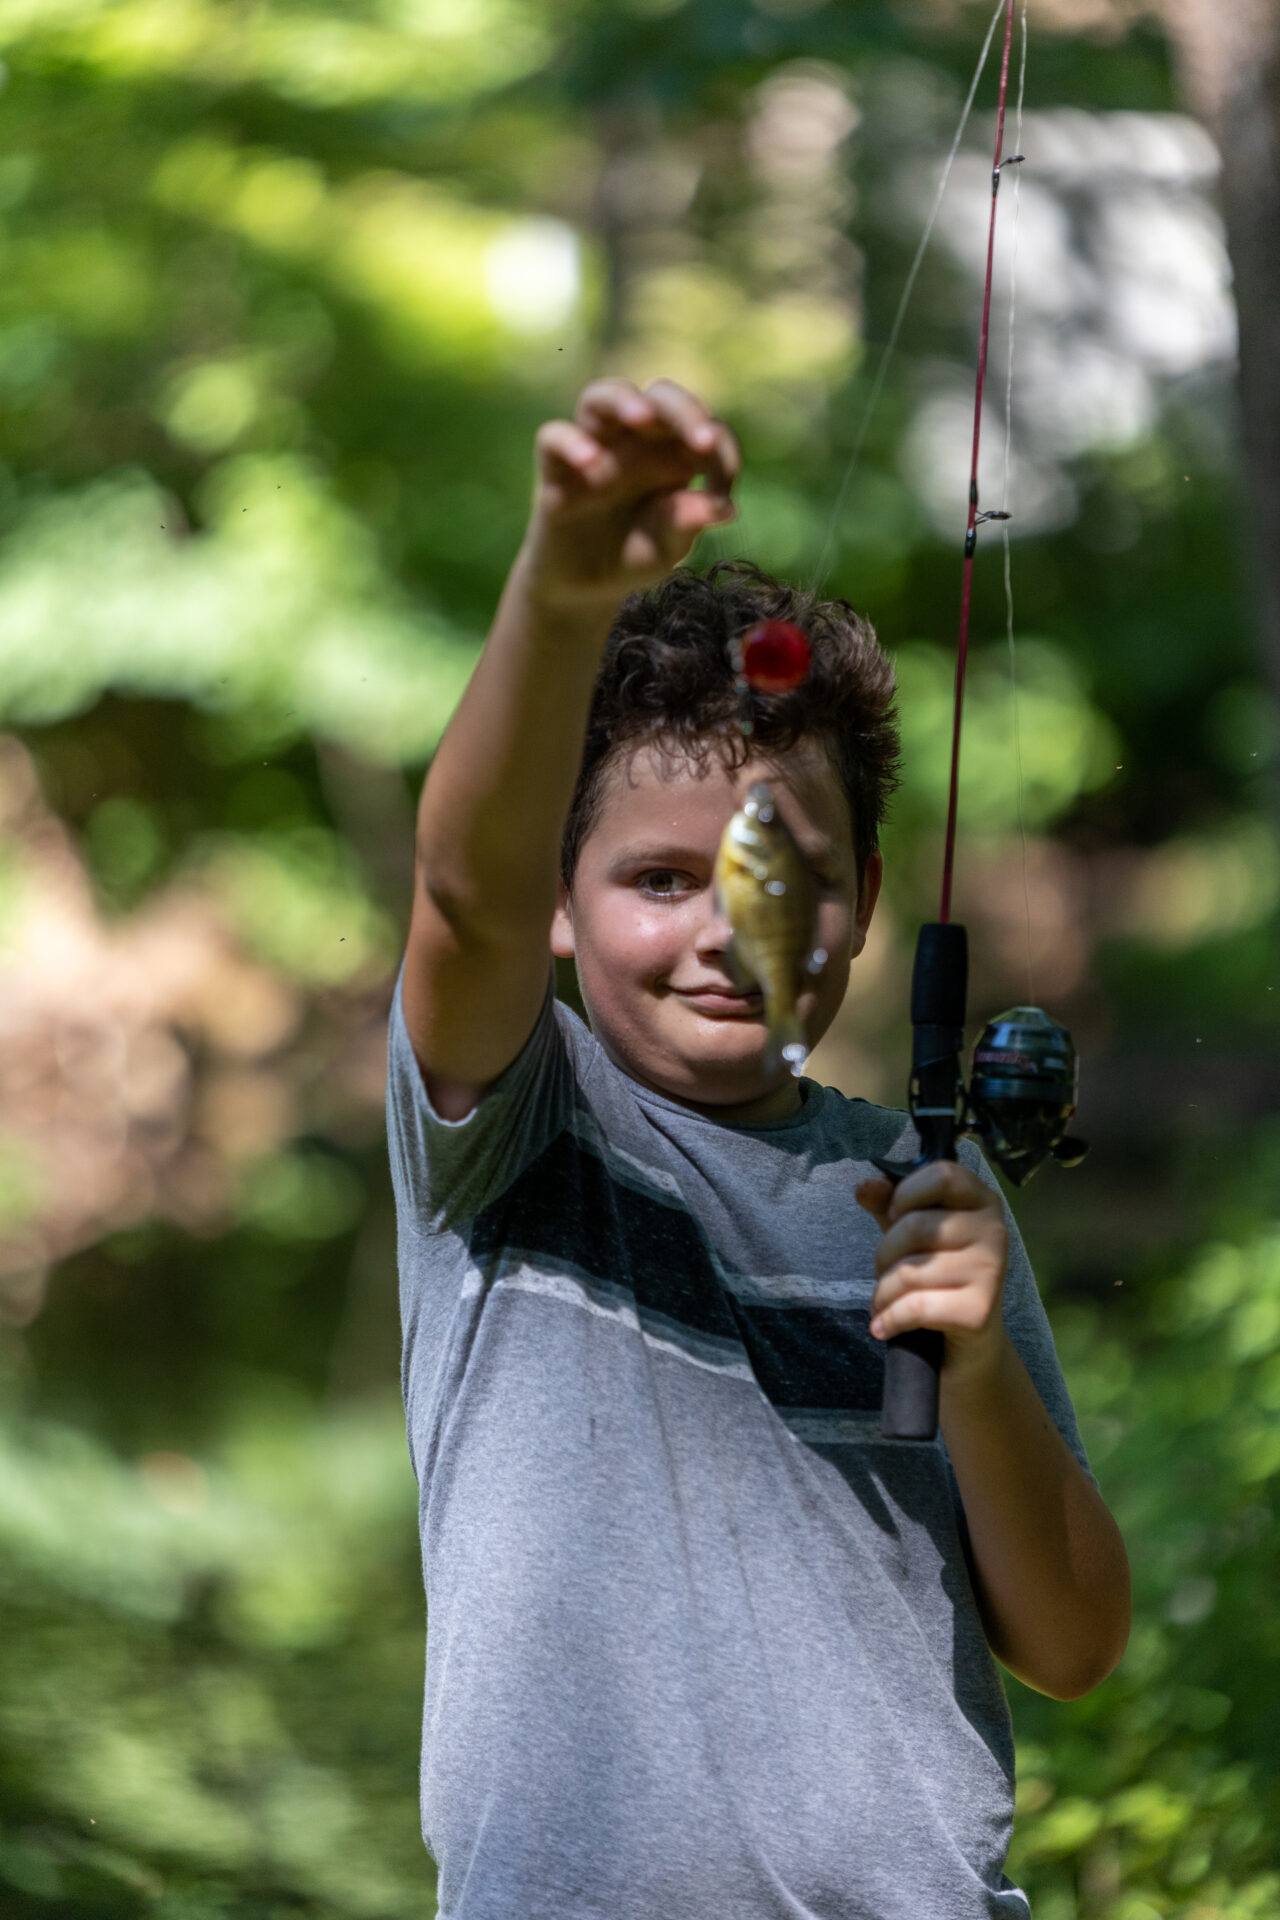 A young boy holding a fishing rod and proudly displaying a fish he caught.